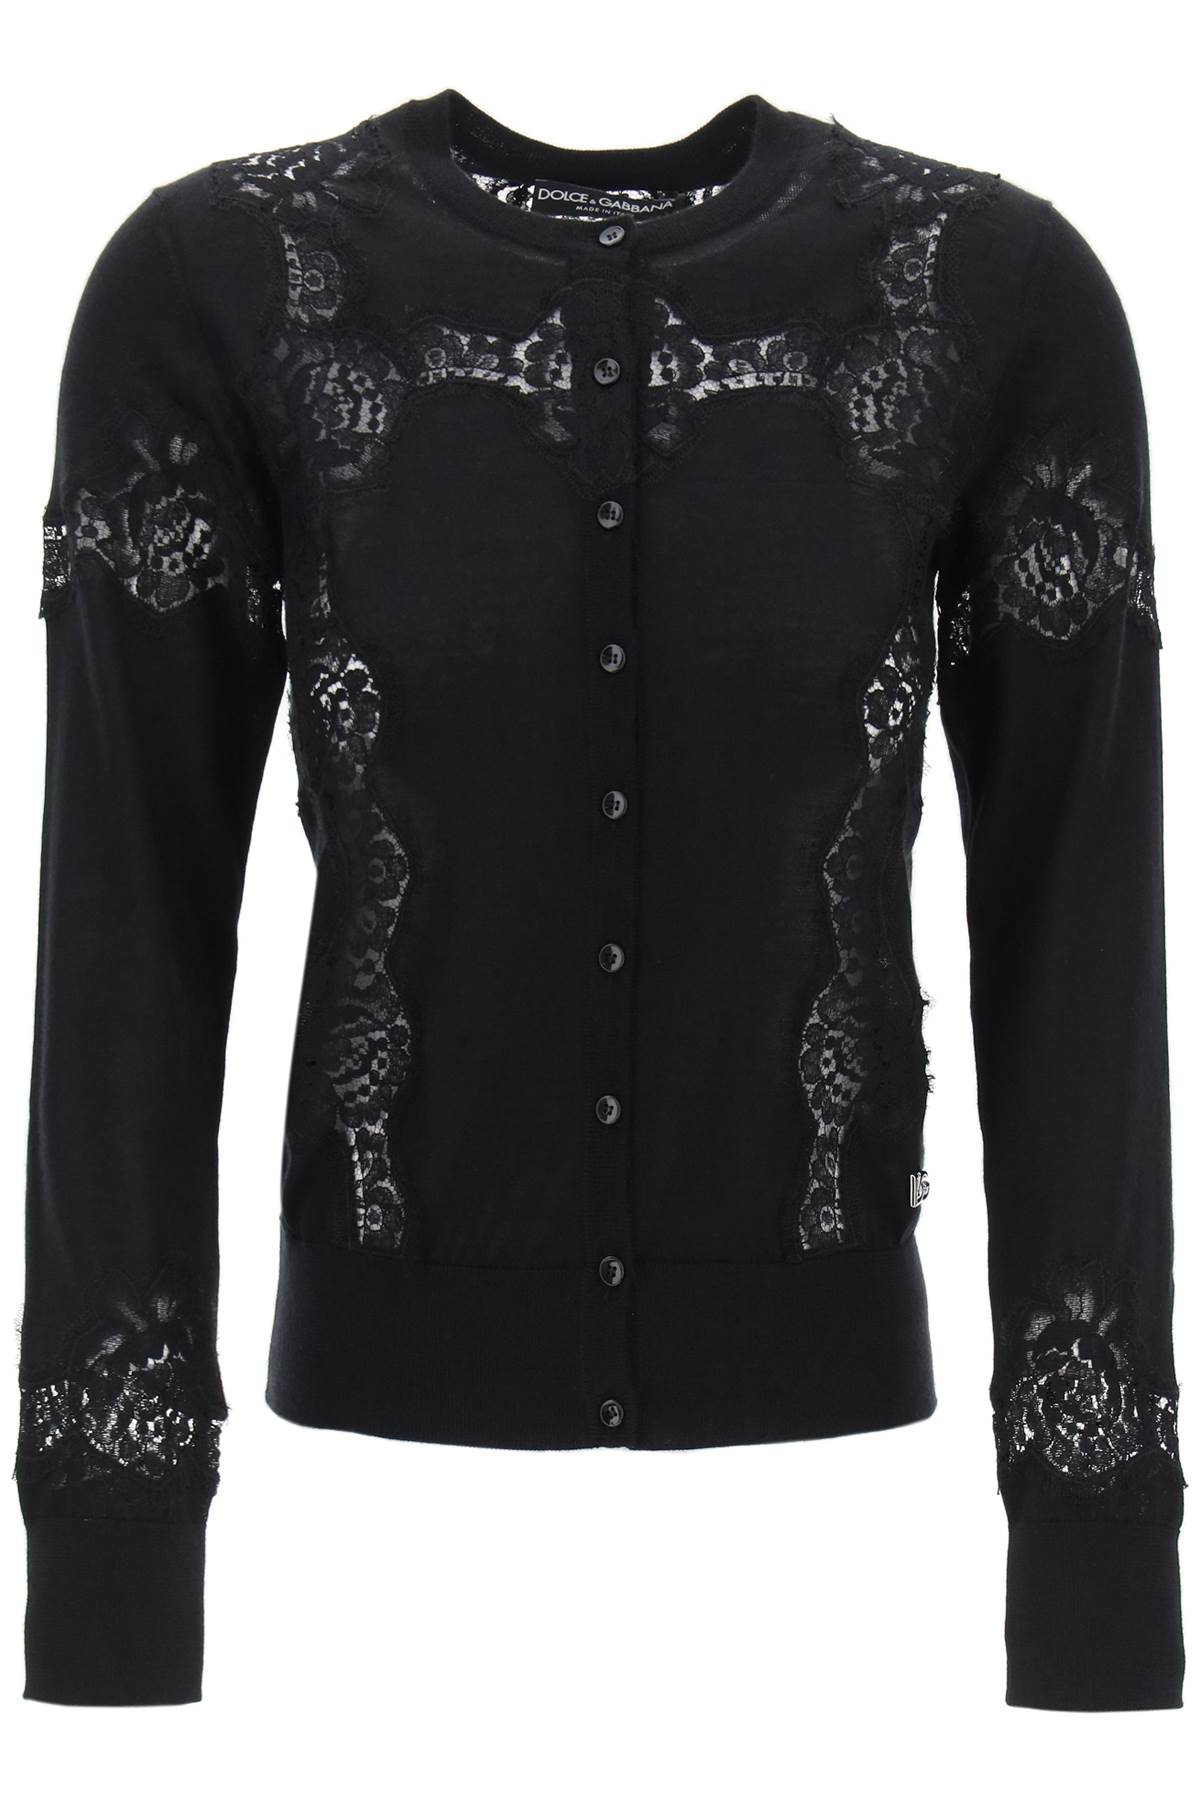 Dolce & gabbana lace-insert cardigan with eight-0